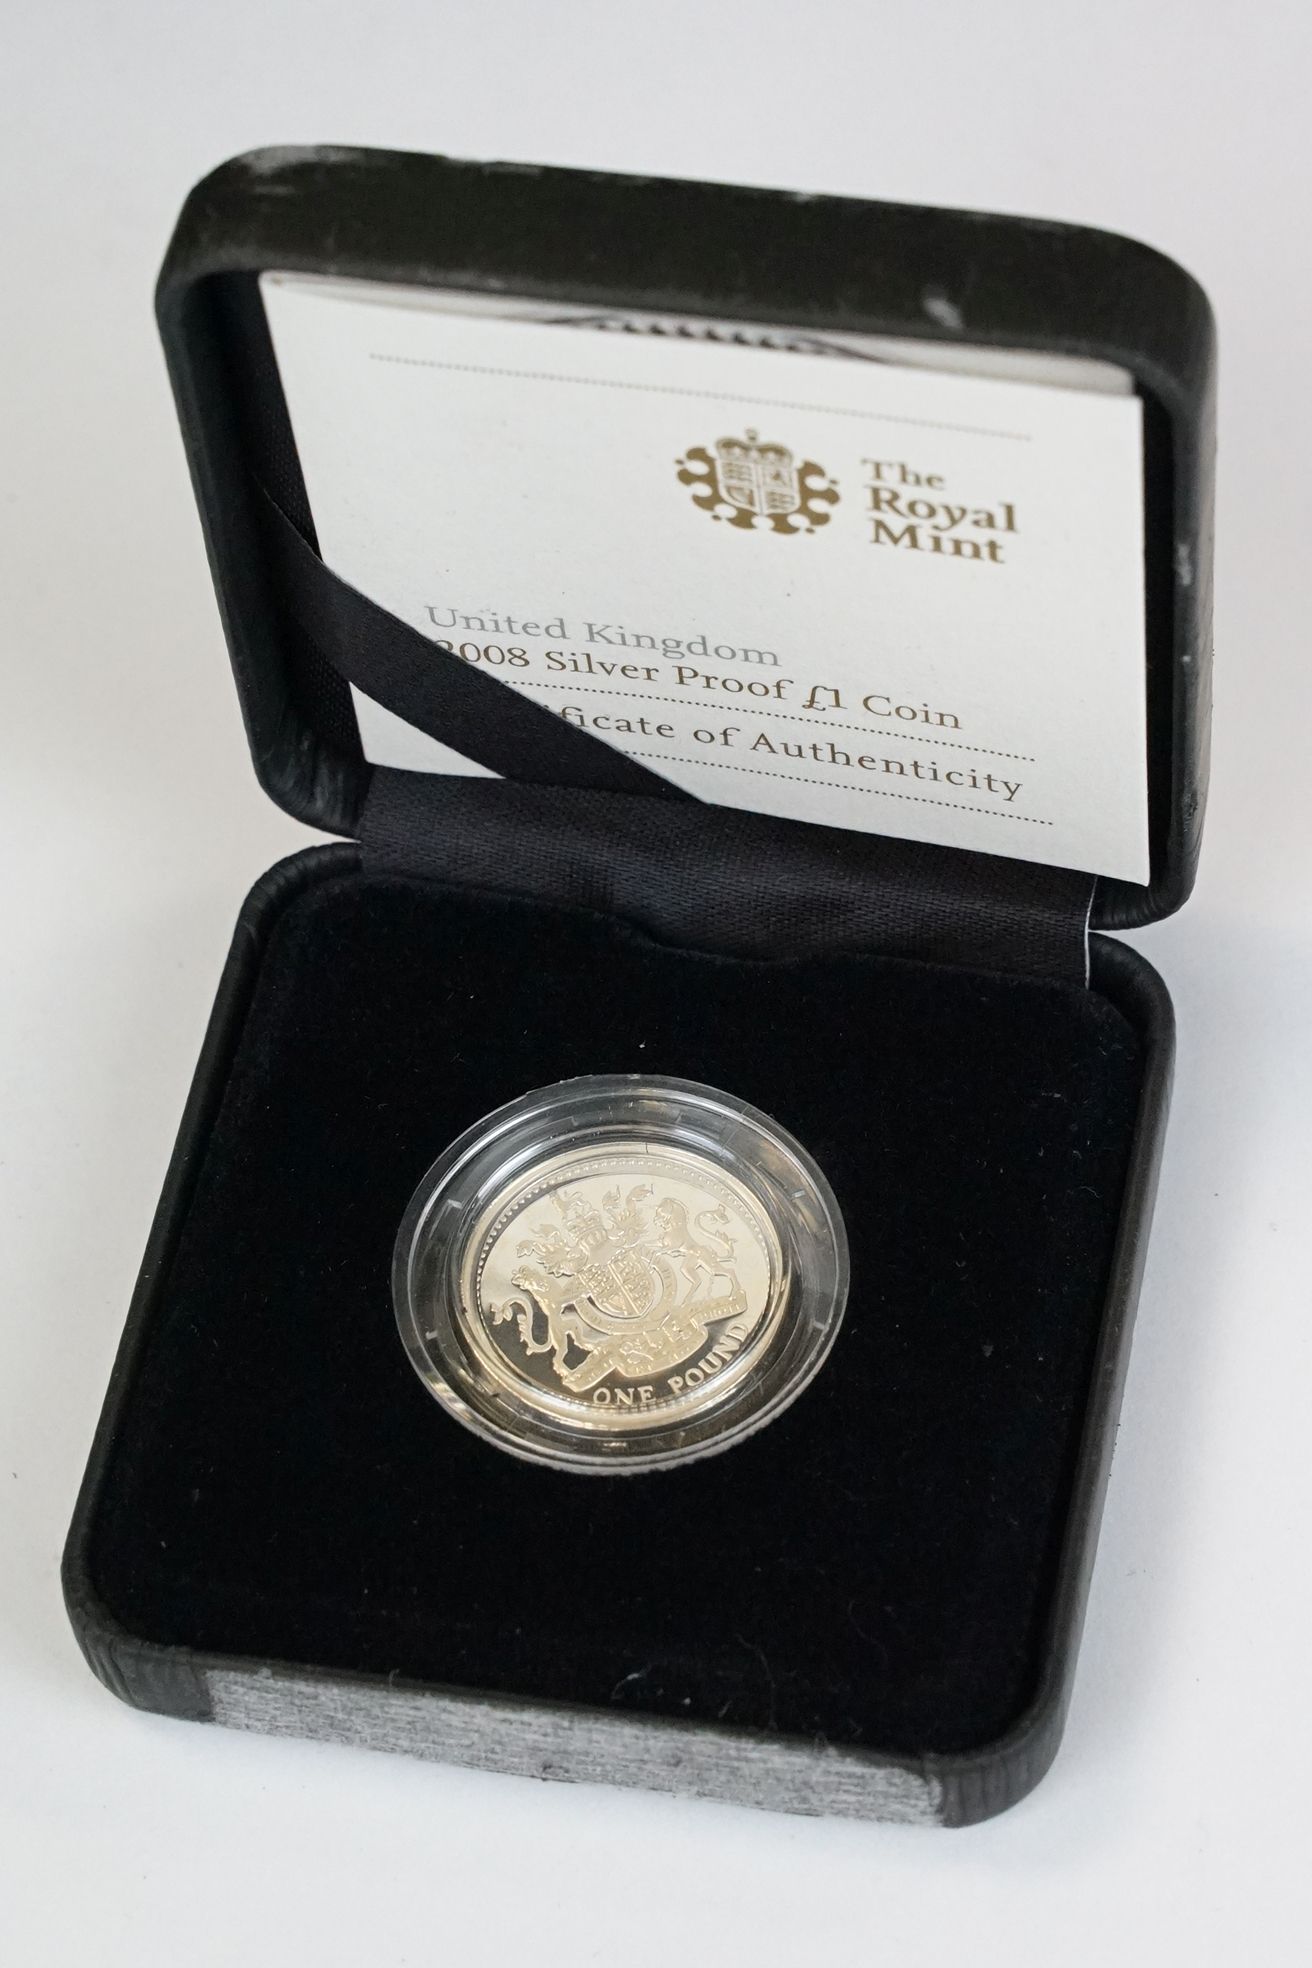 A collection of Three Royal Mint silver proof £1 coins to include 1995, 2001 and 2008 examples. - Image 5 of 10